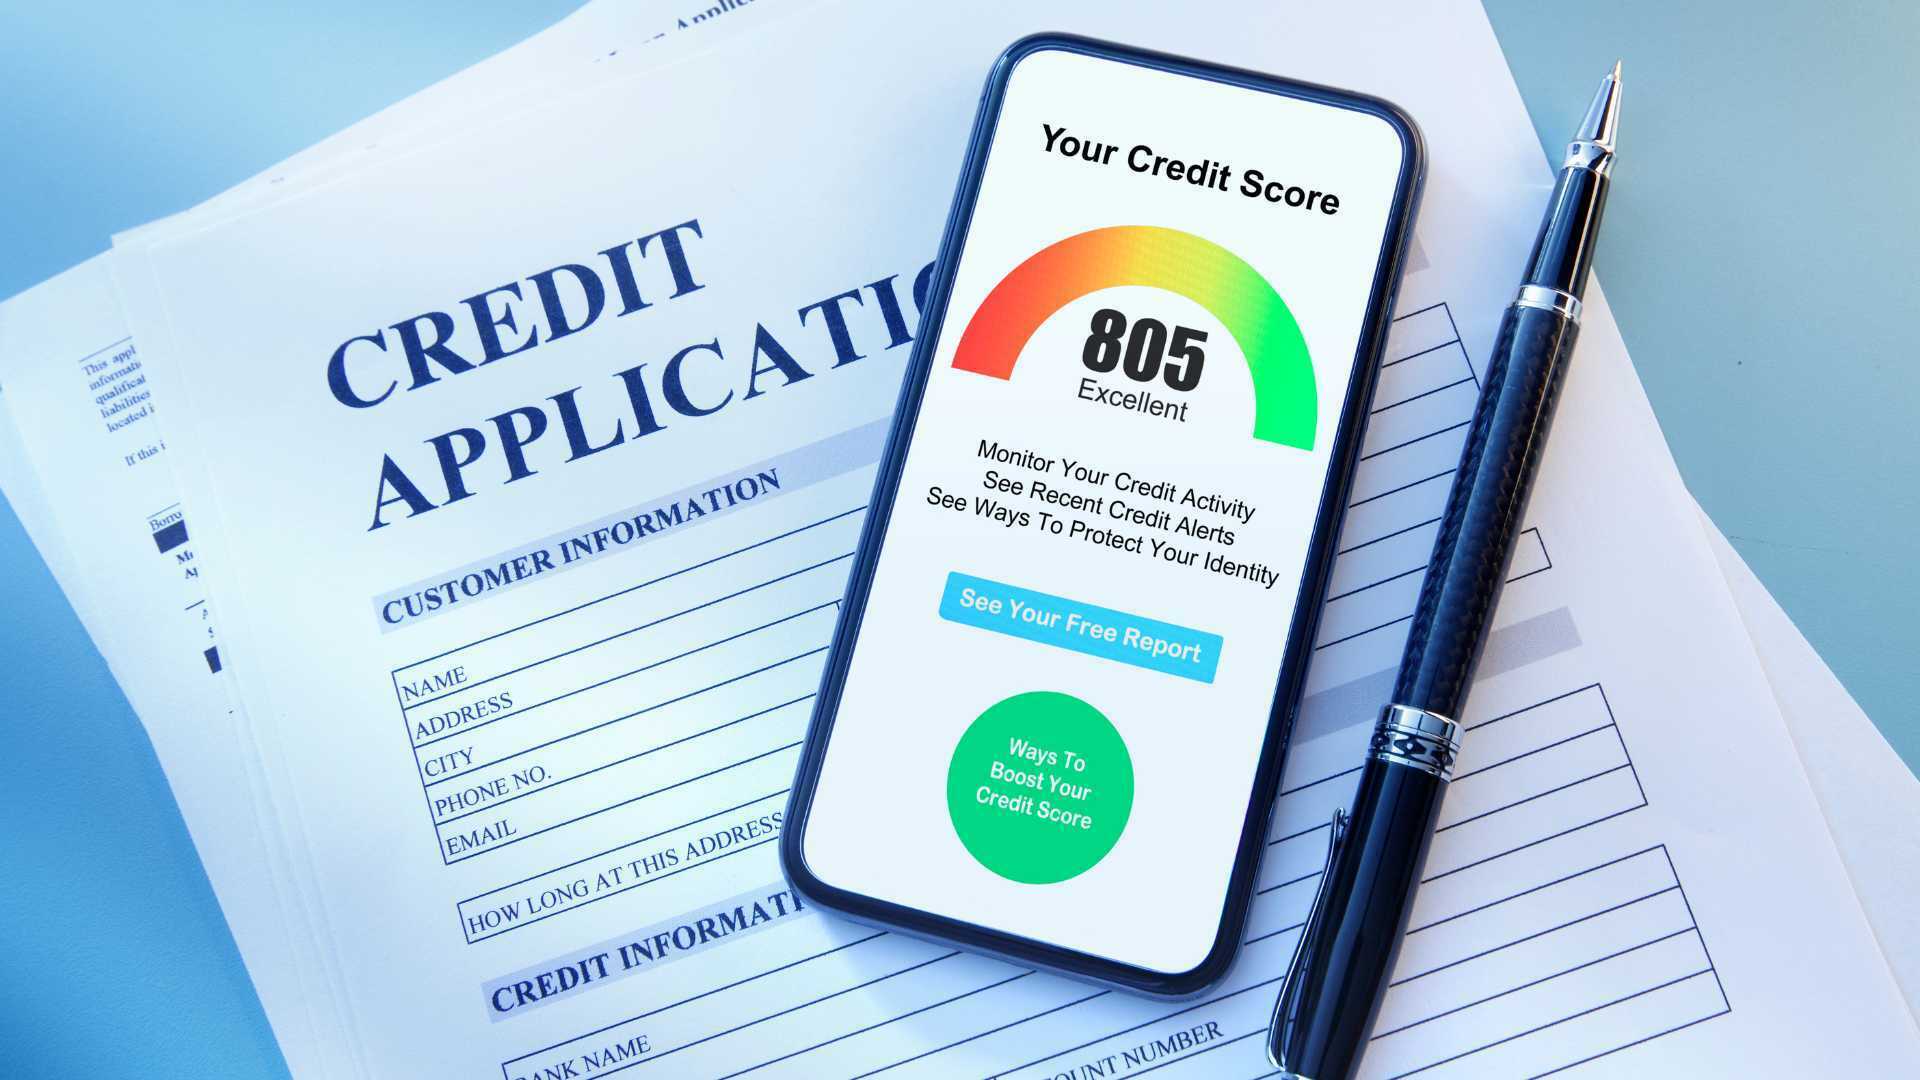 What Is the Highest Credit Score and Why it's Important? - FinanceCage